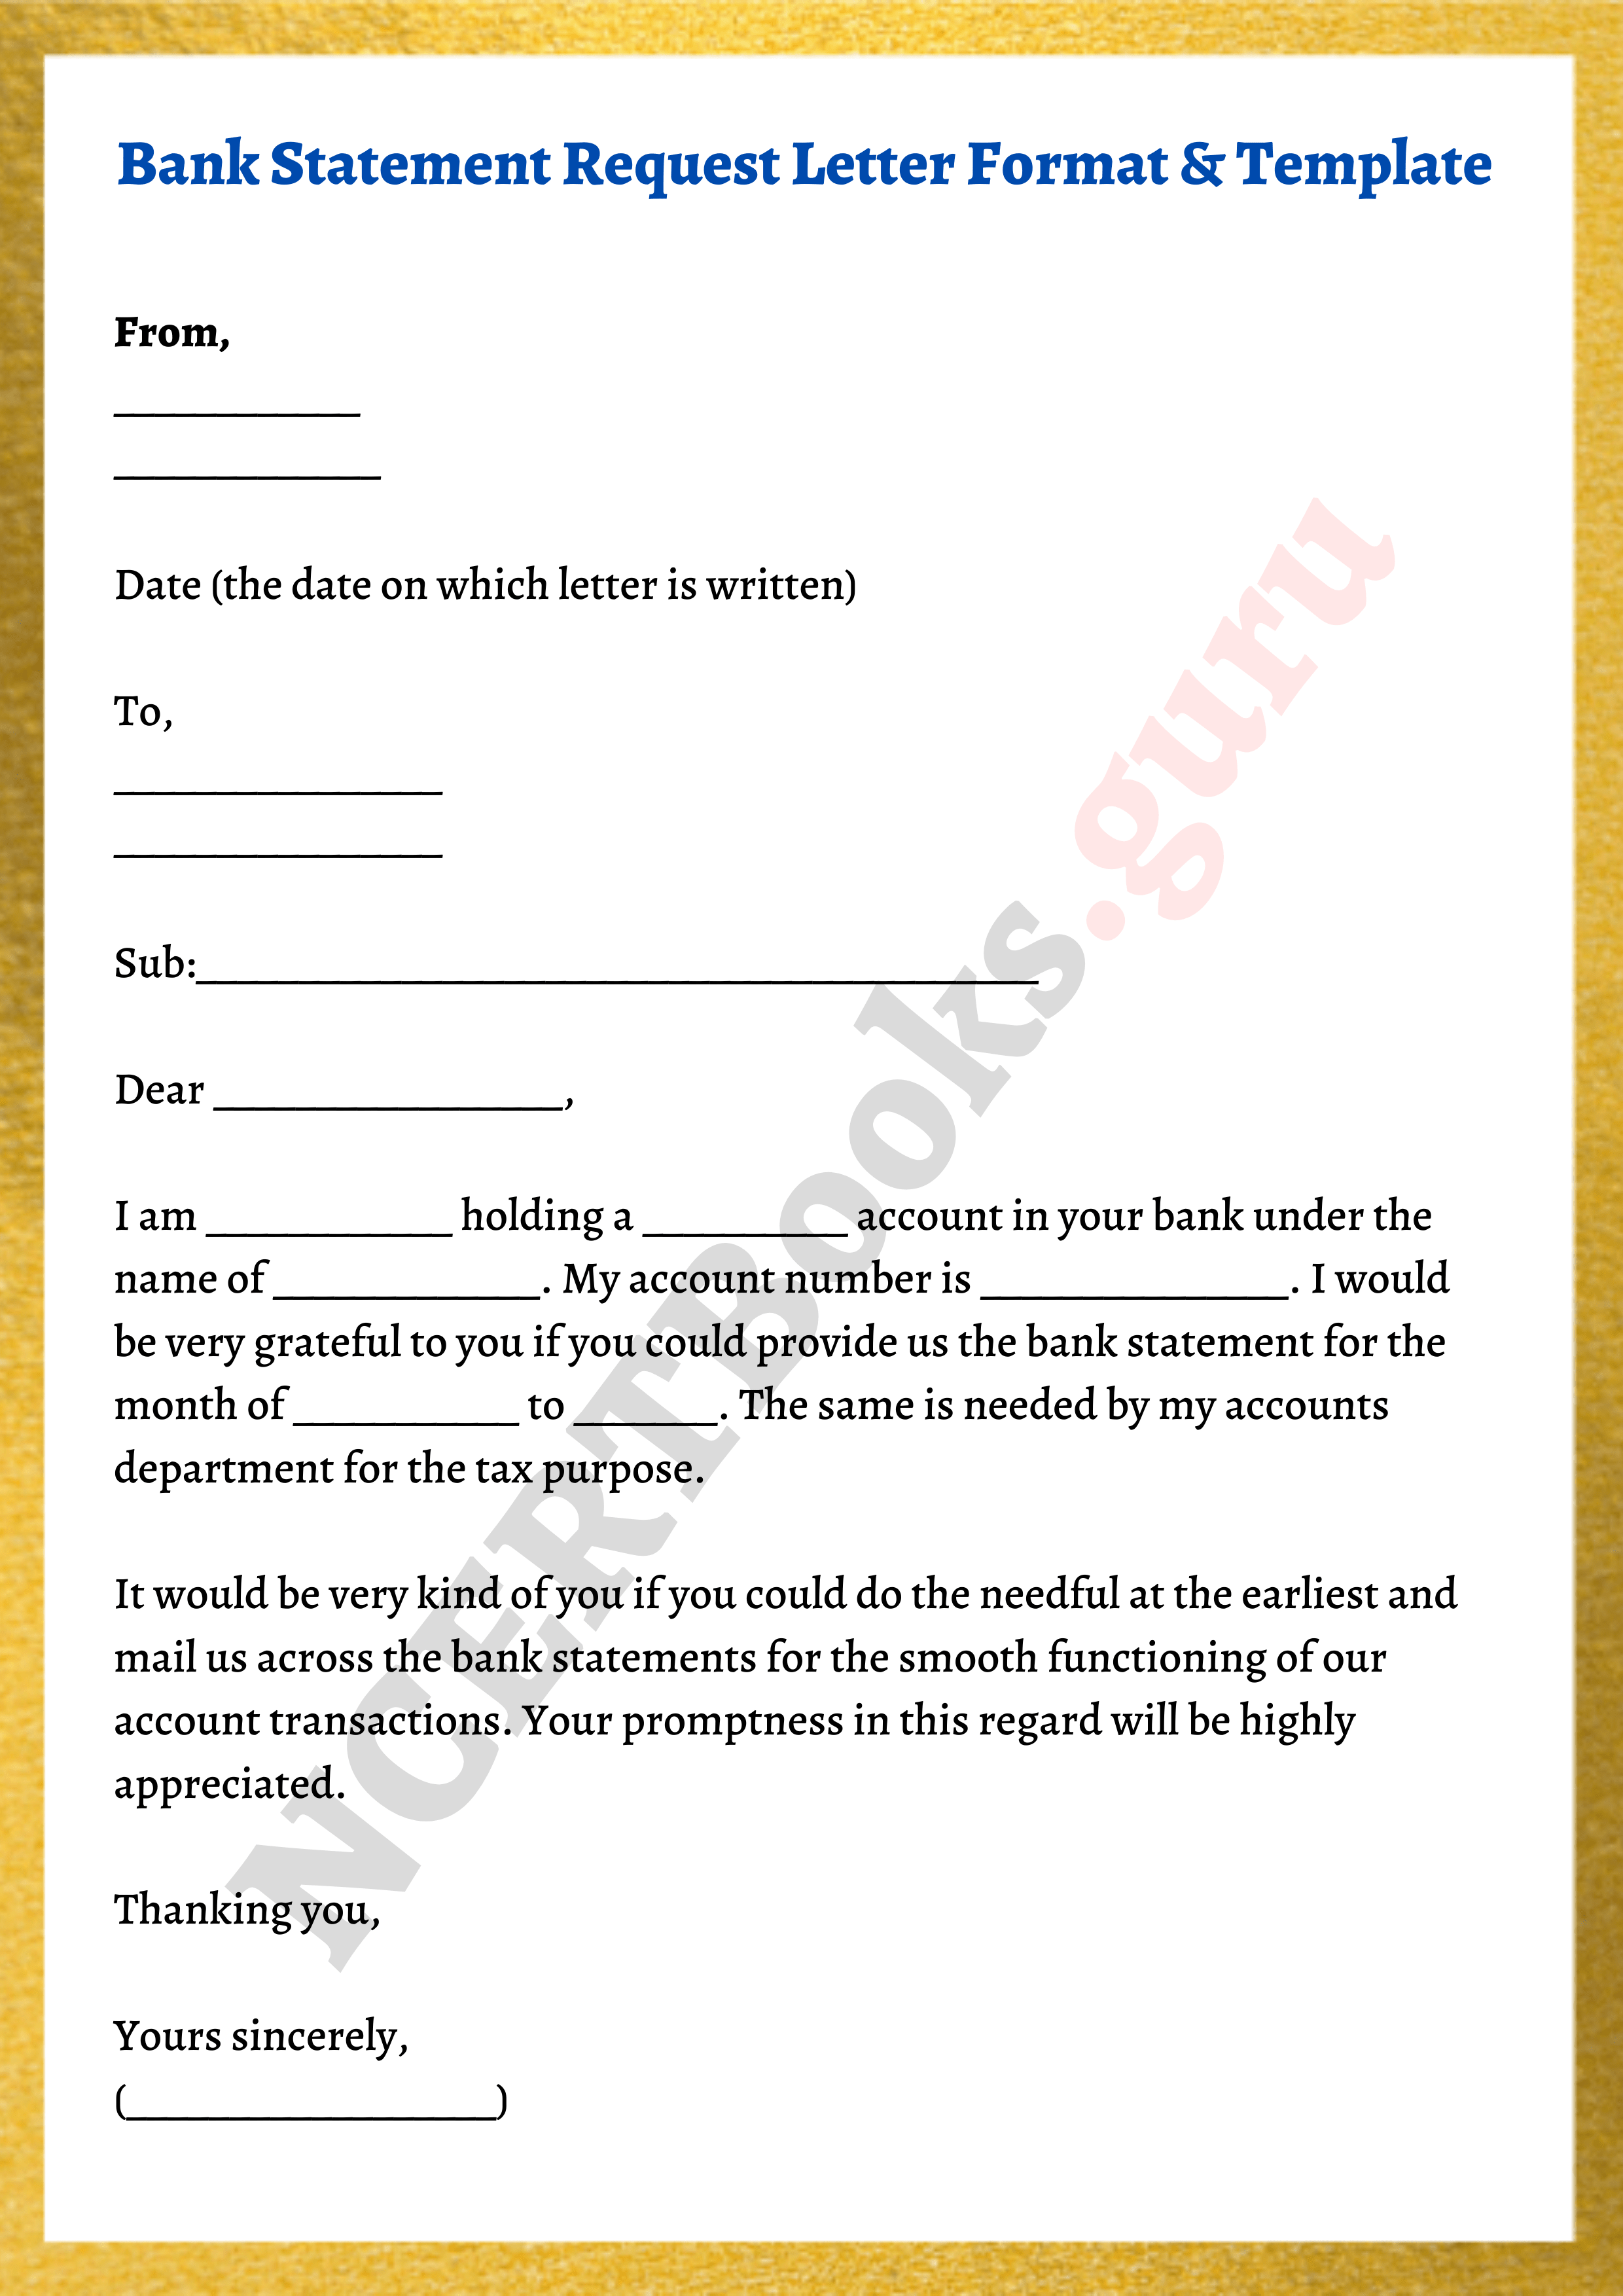 loan letter to bank manager